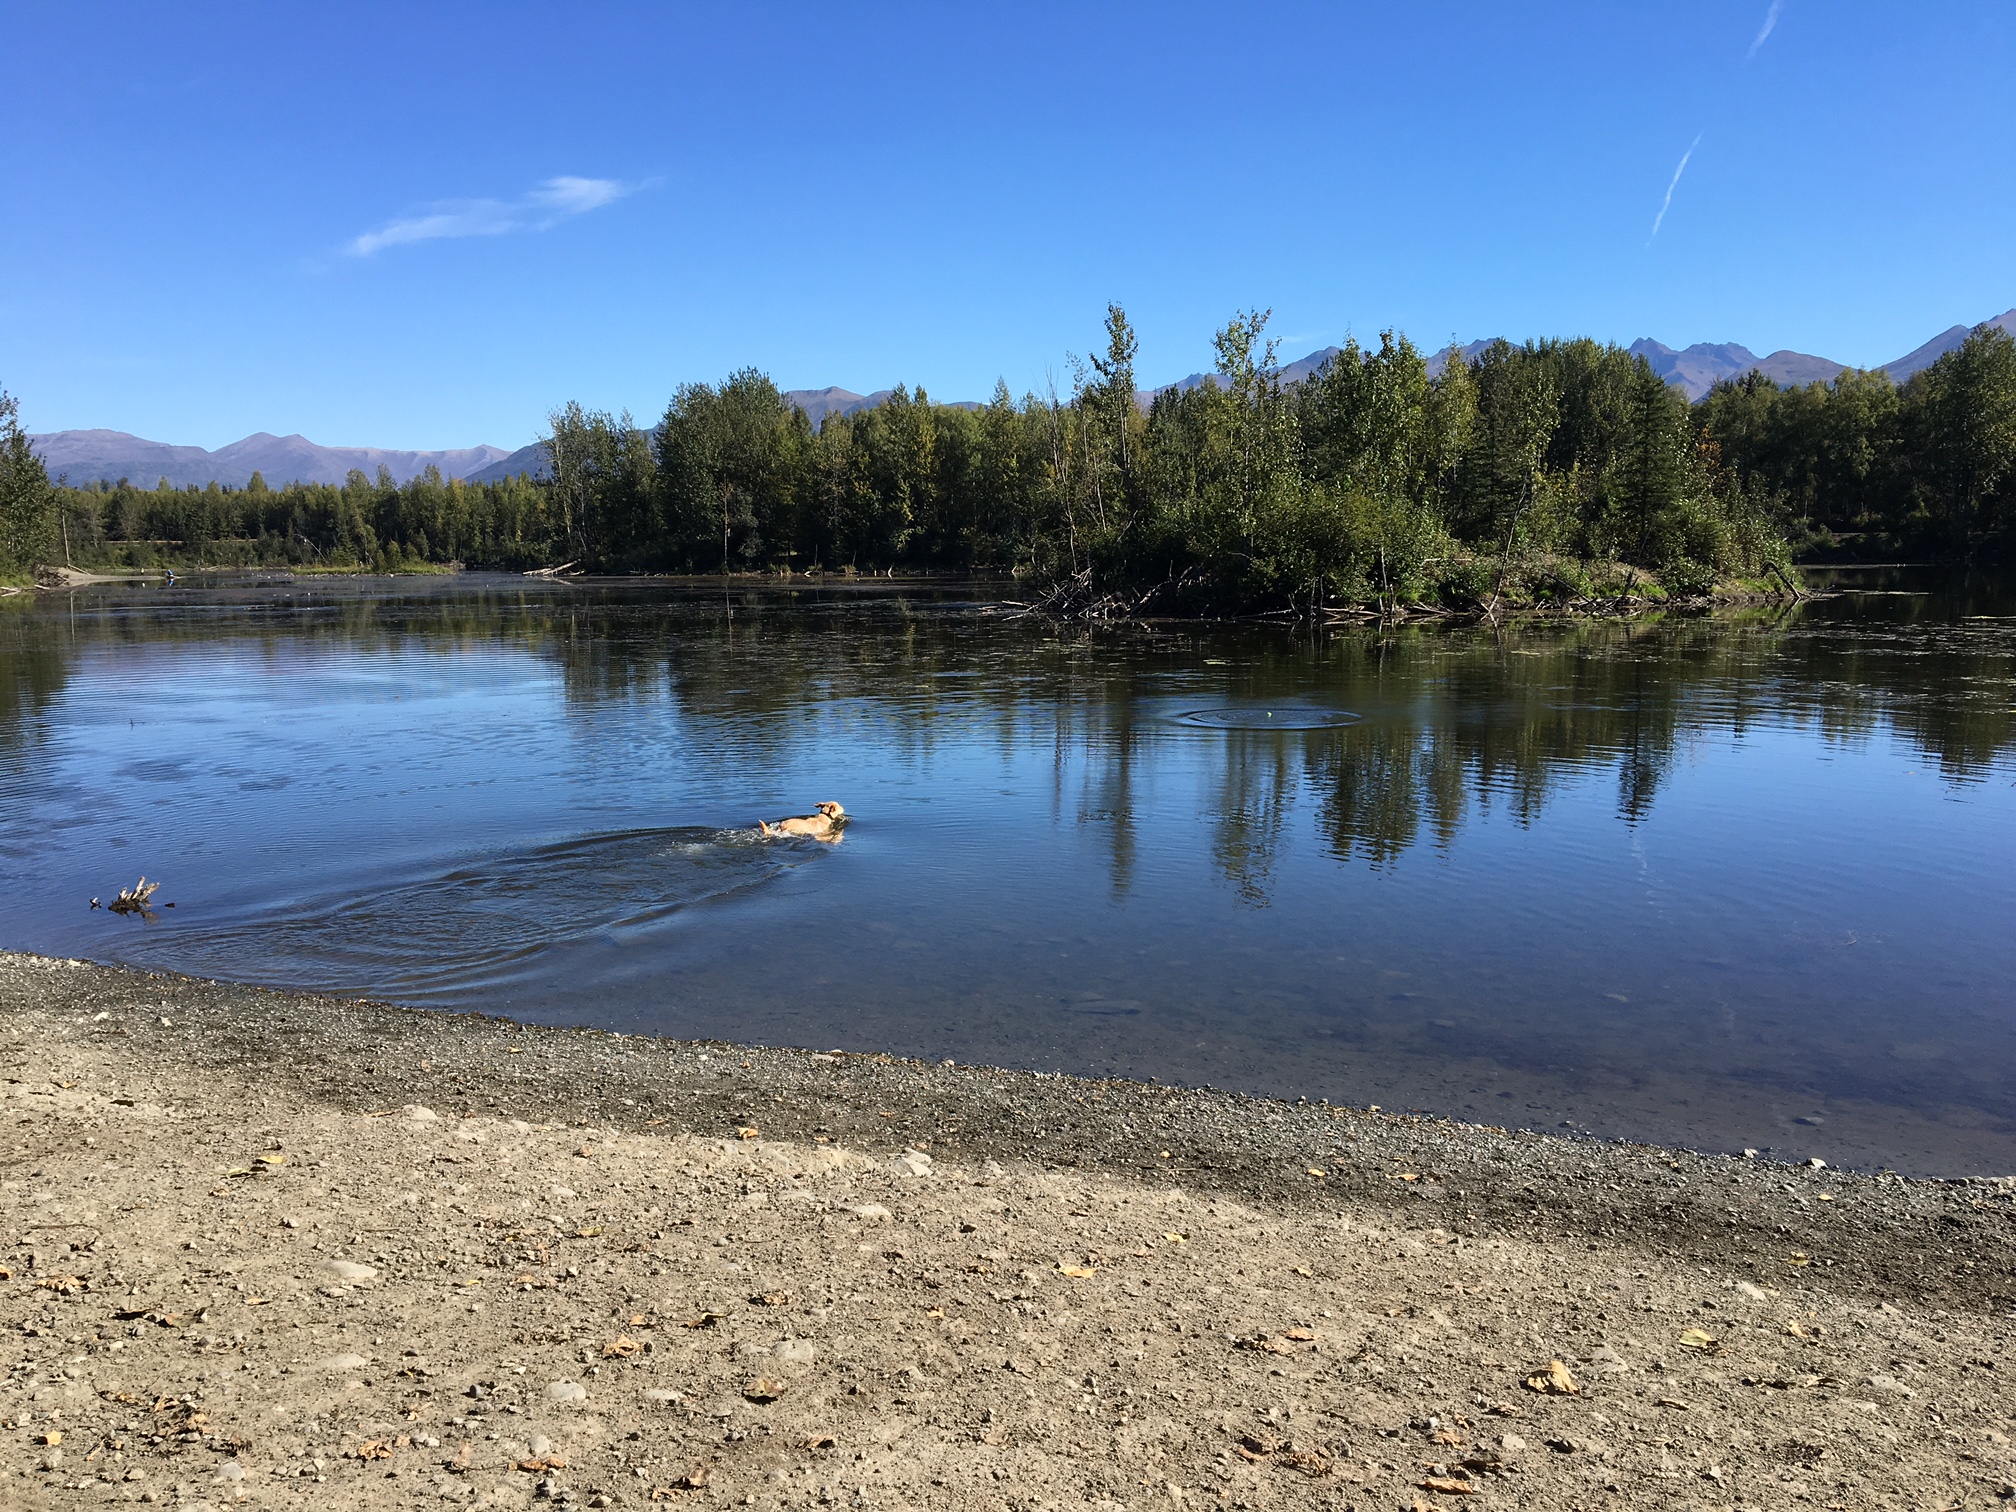 A dog swims in University Lake in Anchorage on Aug. 31, 2016. (Photo By Annie Feidt, Alaska’s Energy Desk - Anchorage)